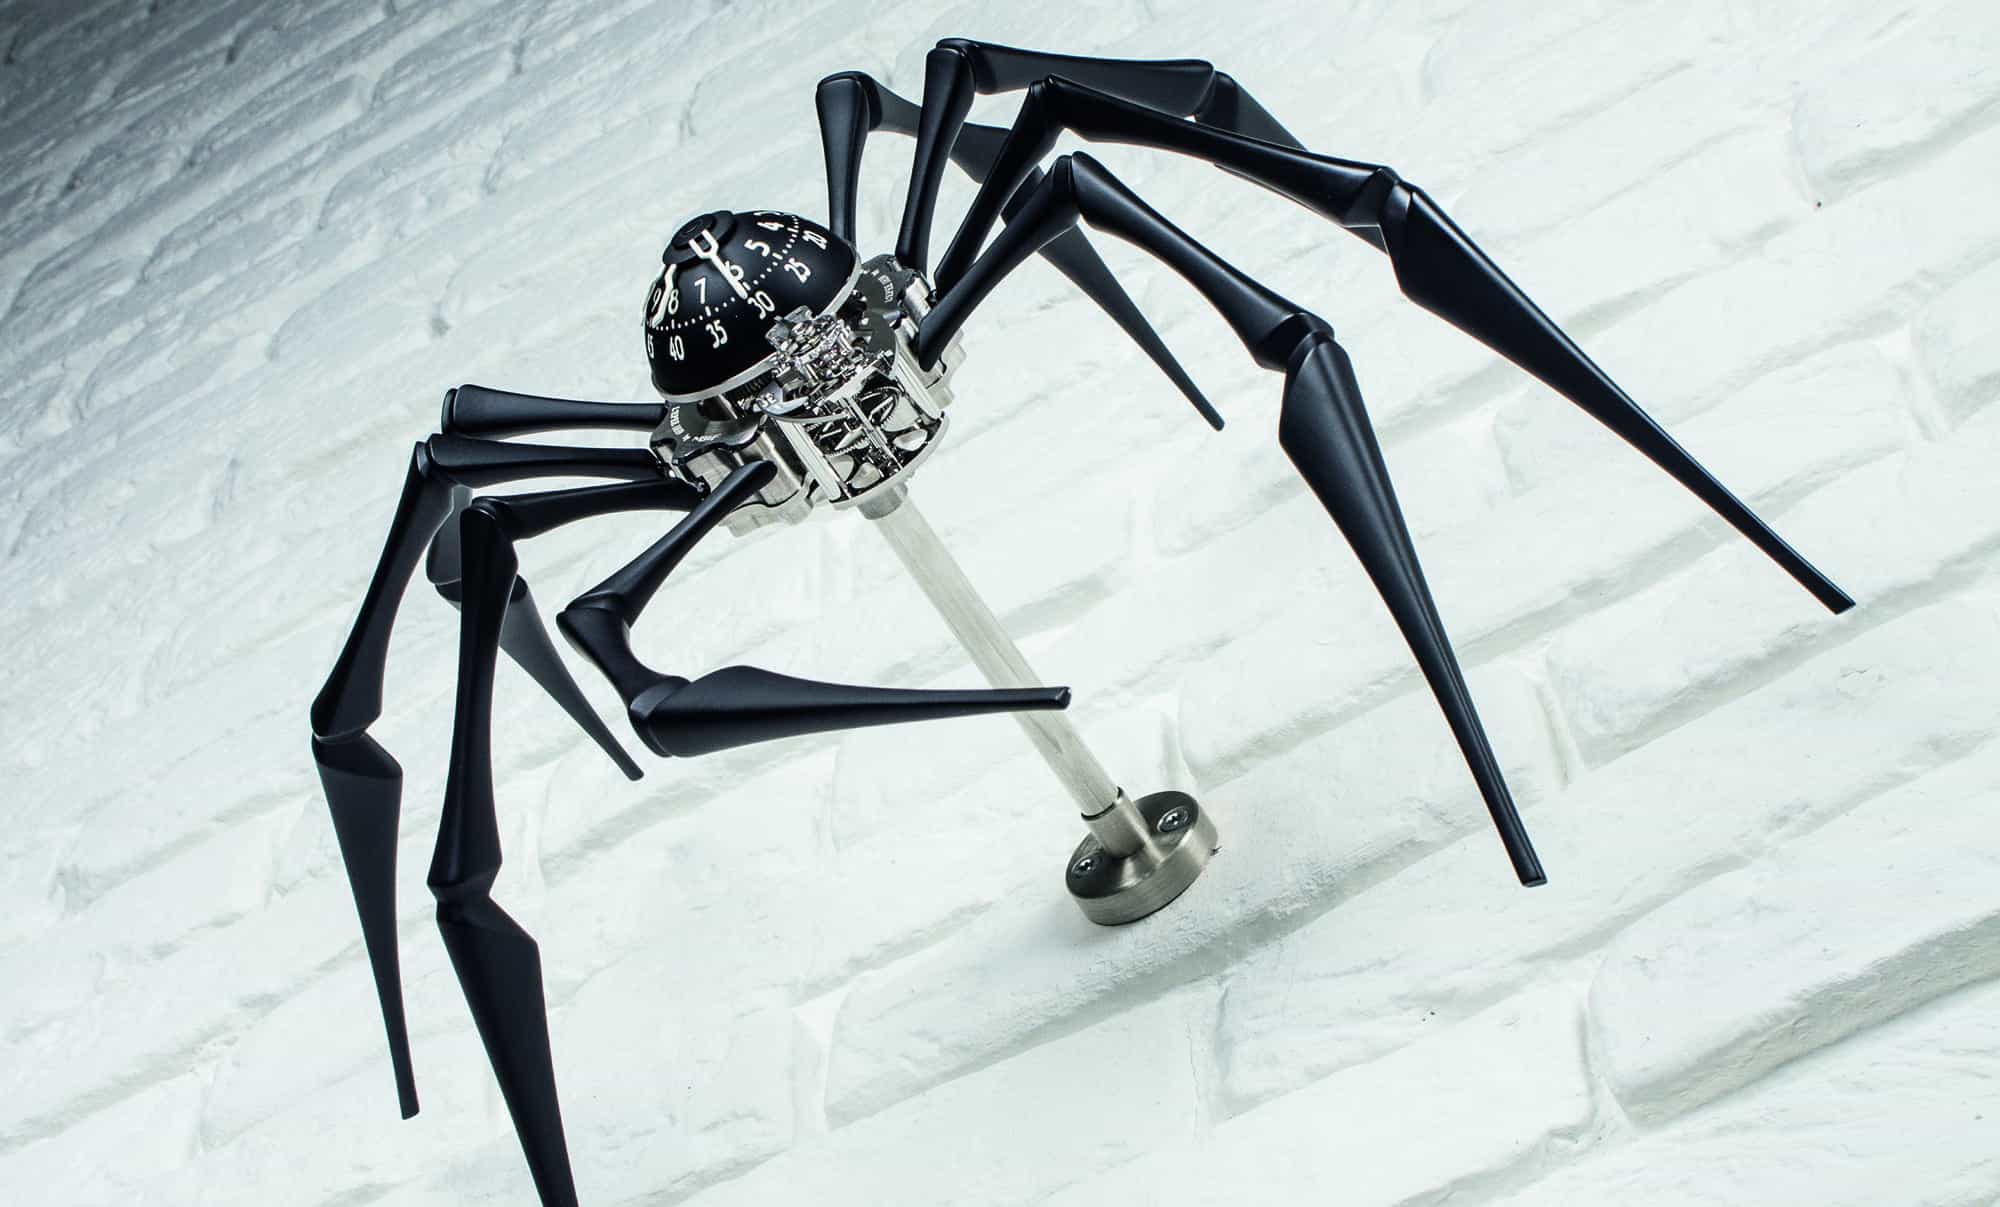 Louise Bourgeois' Giant Spider to Arrive at Christie's Just in Time For  Halloween